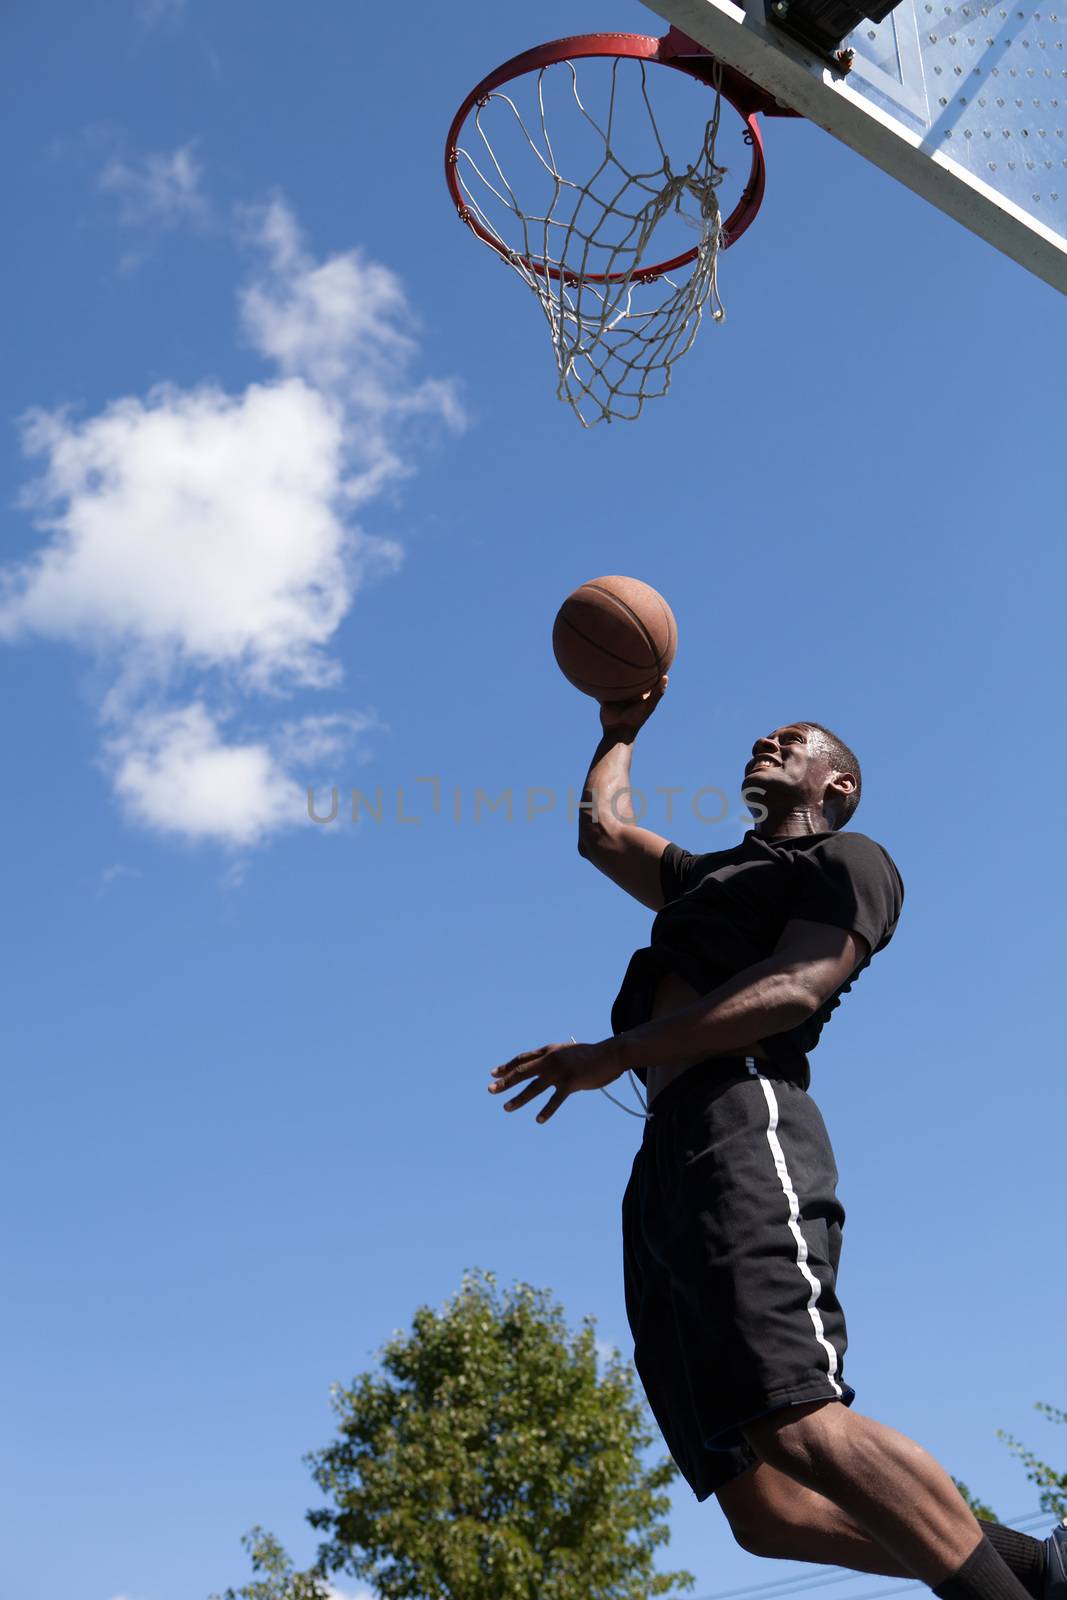 Man Dunking a Basketball by graficallyminded